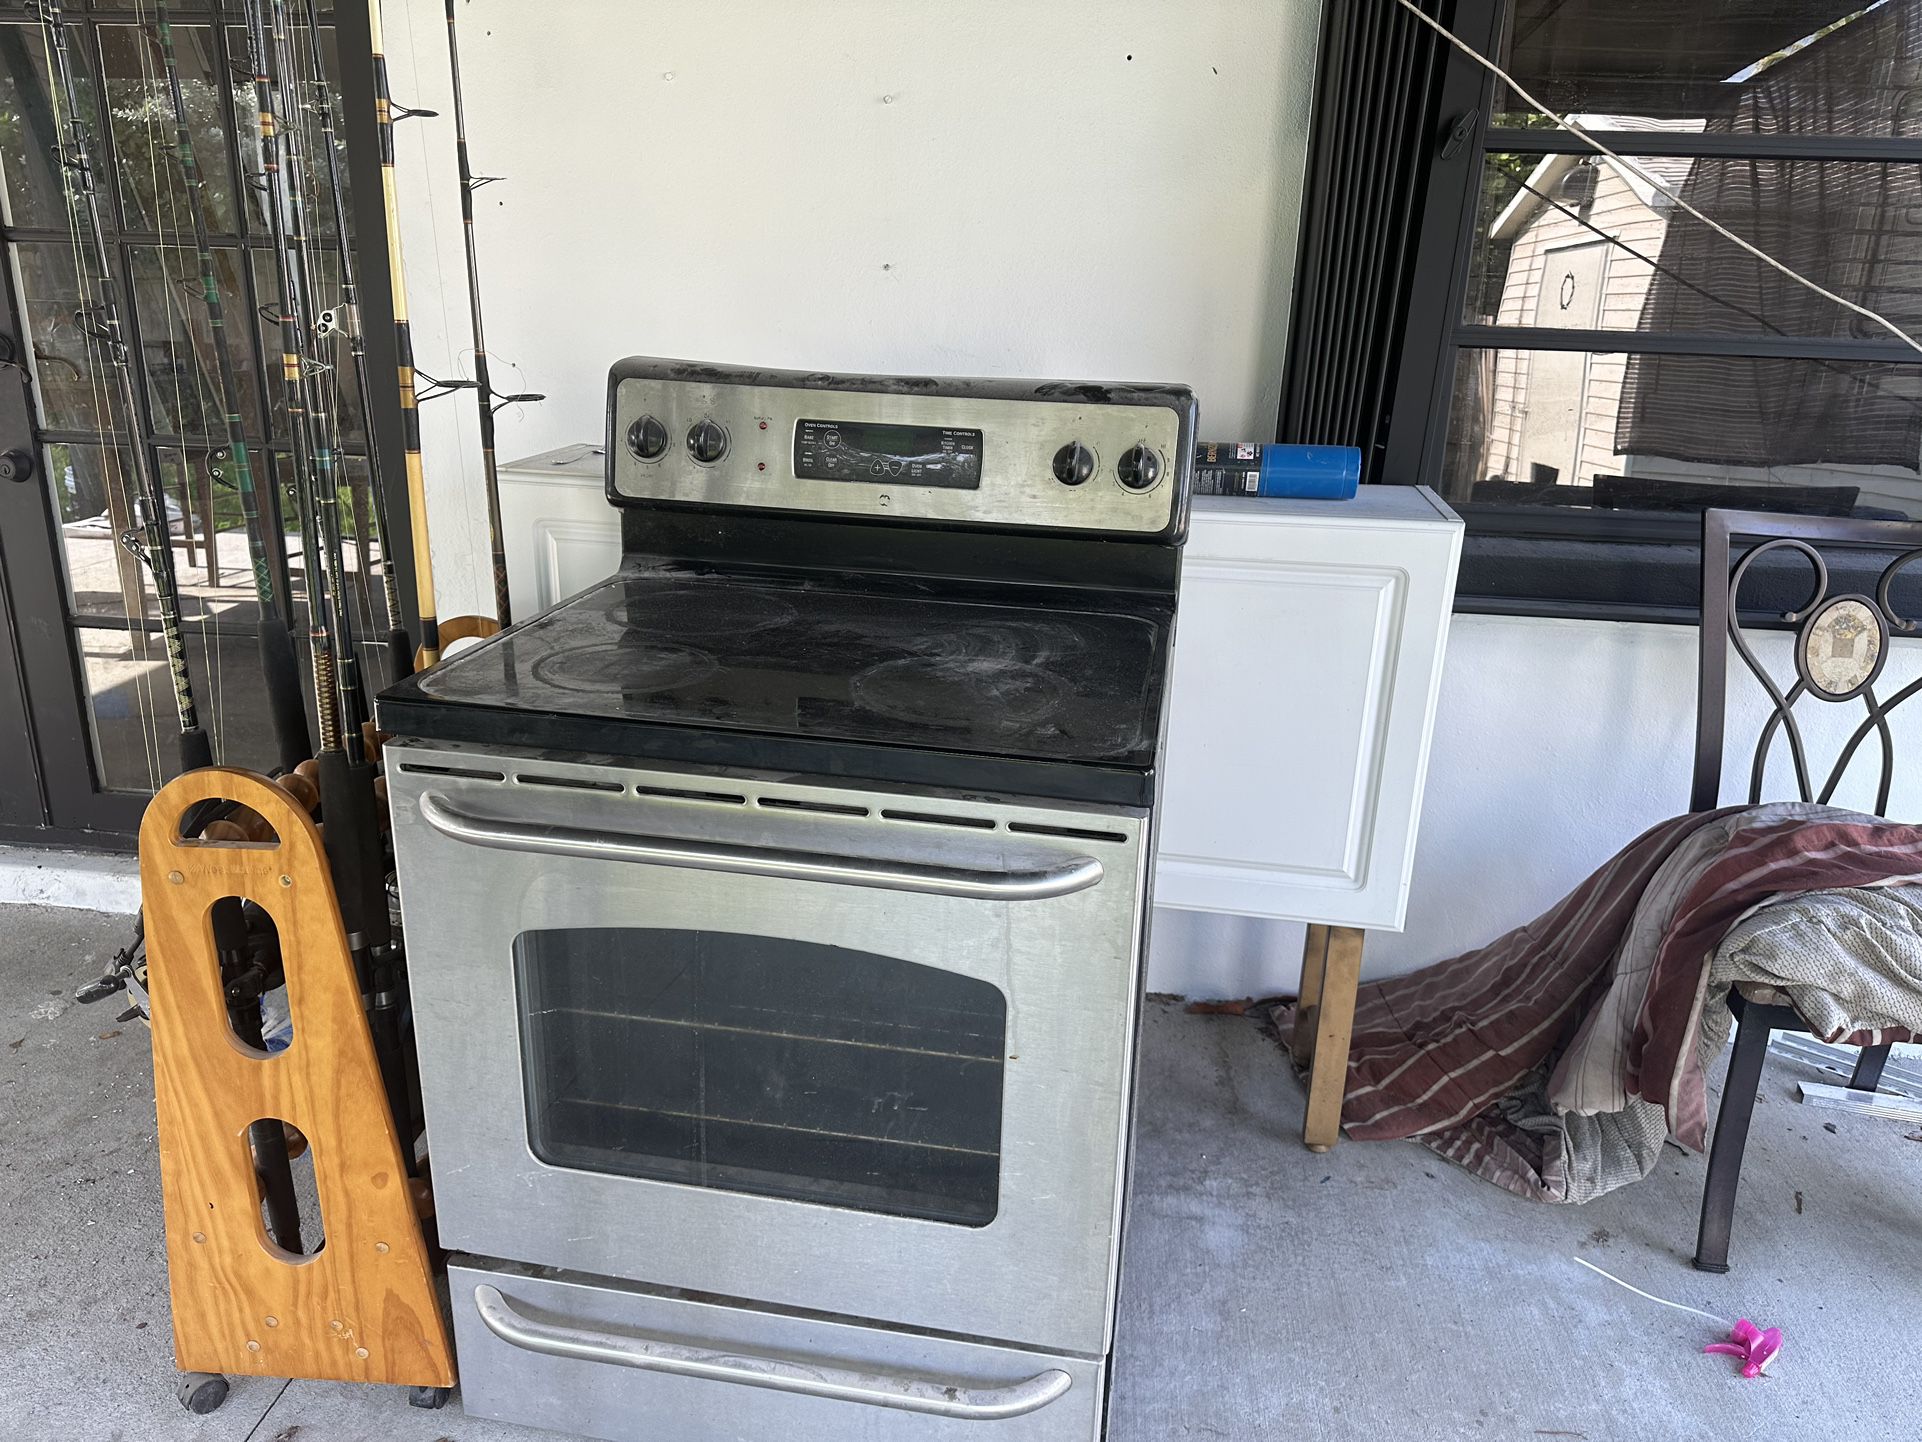 Stainless & Black Stove. Works Great $50